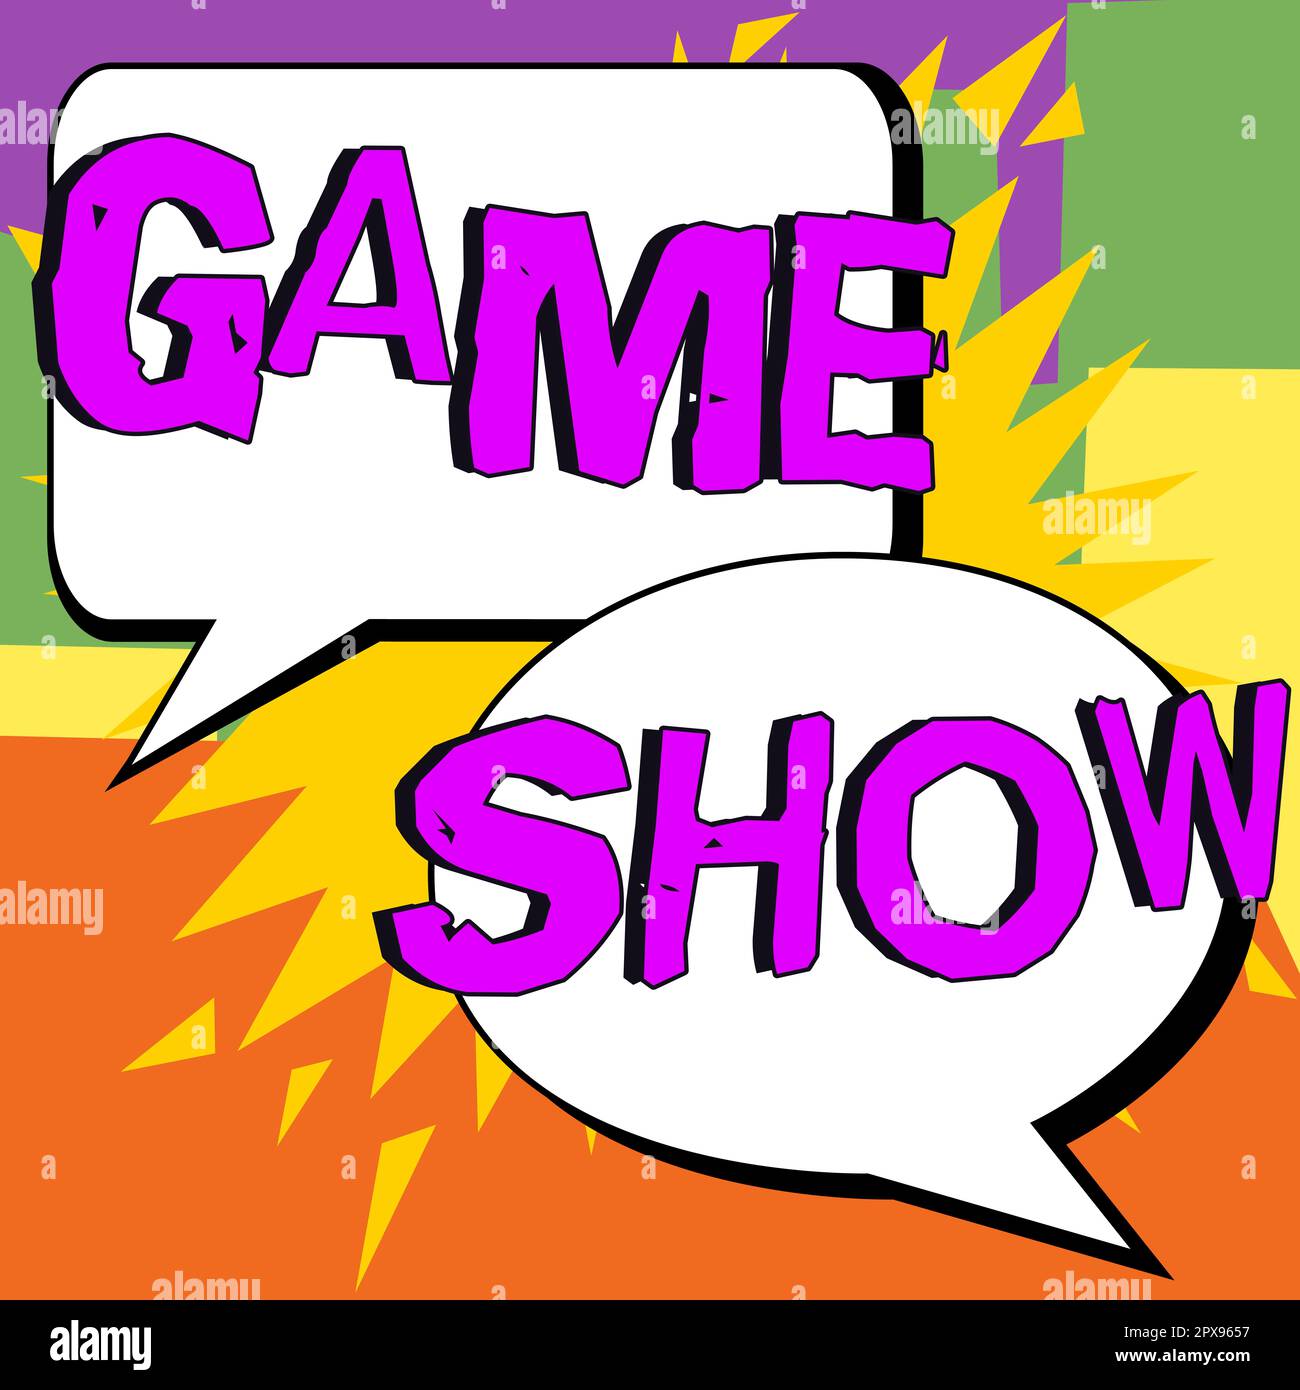 Text showing inspiration Game Show, Internet Concept Program in television or radio with players that win prizes Stock Photo